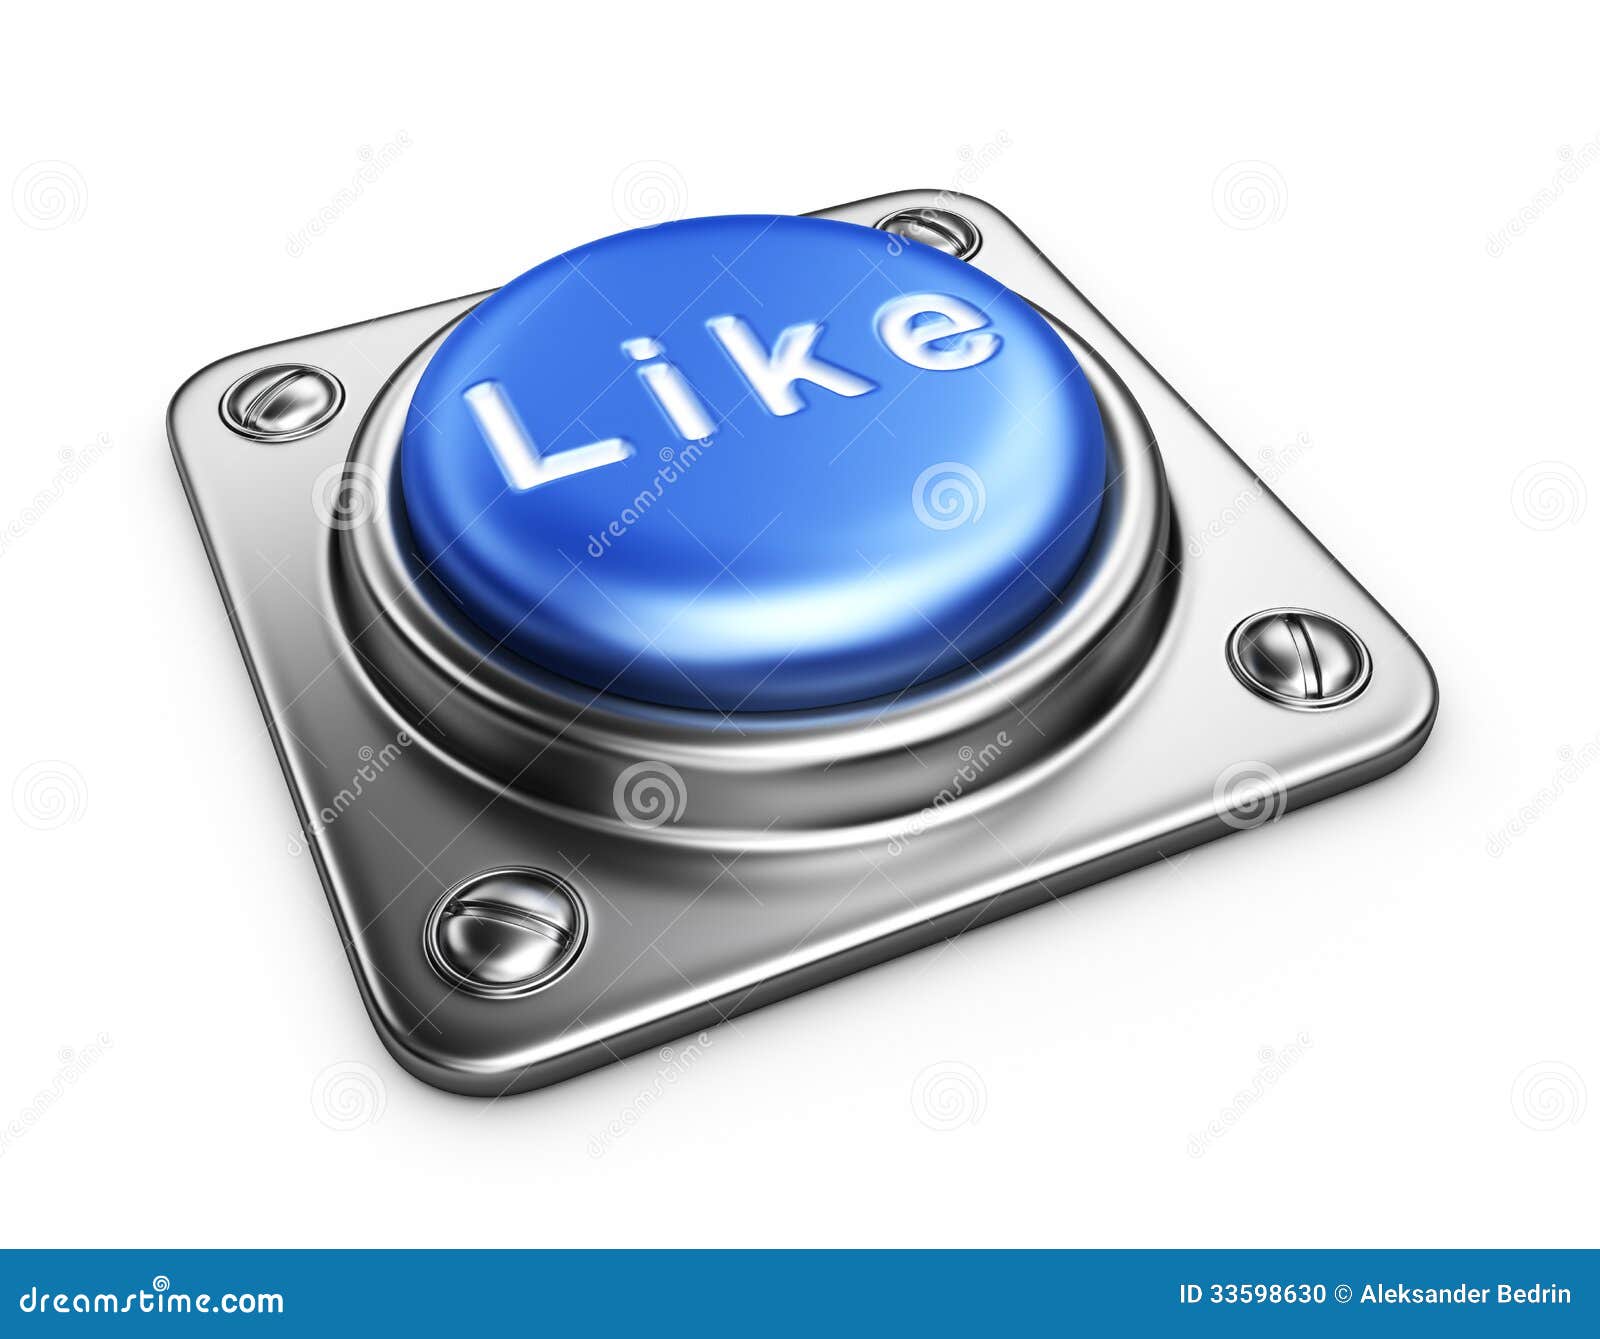 blue-like-button-d-icon-isolated-white-background-33598630.jpg